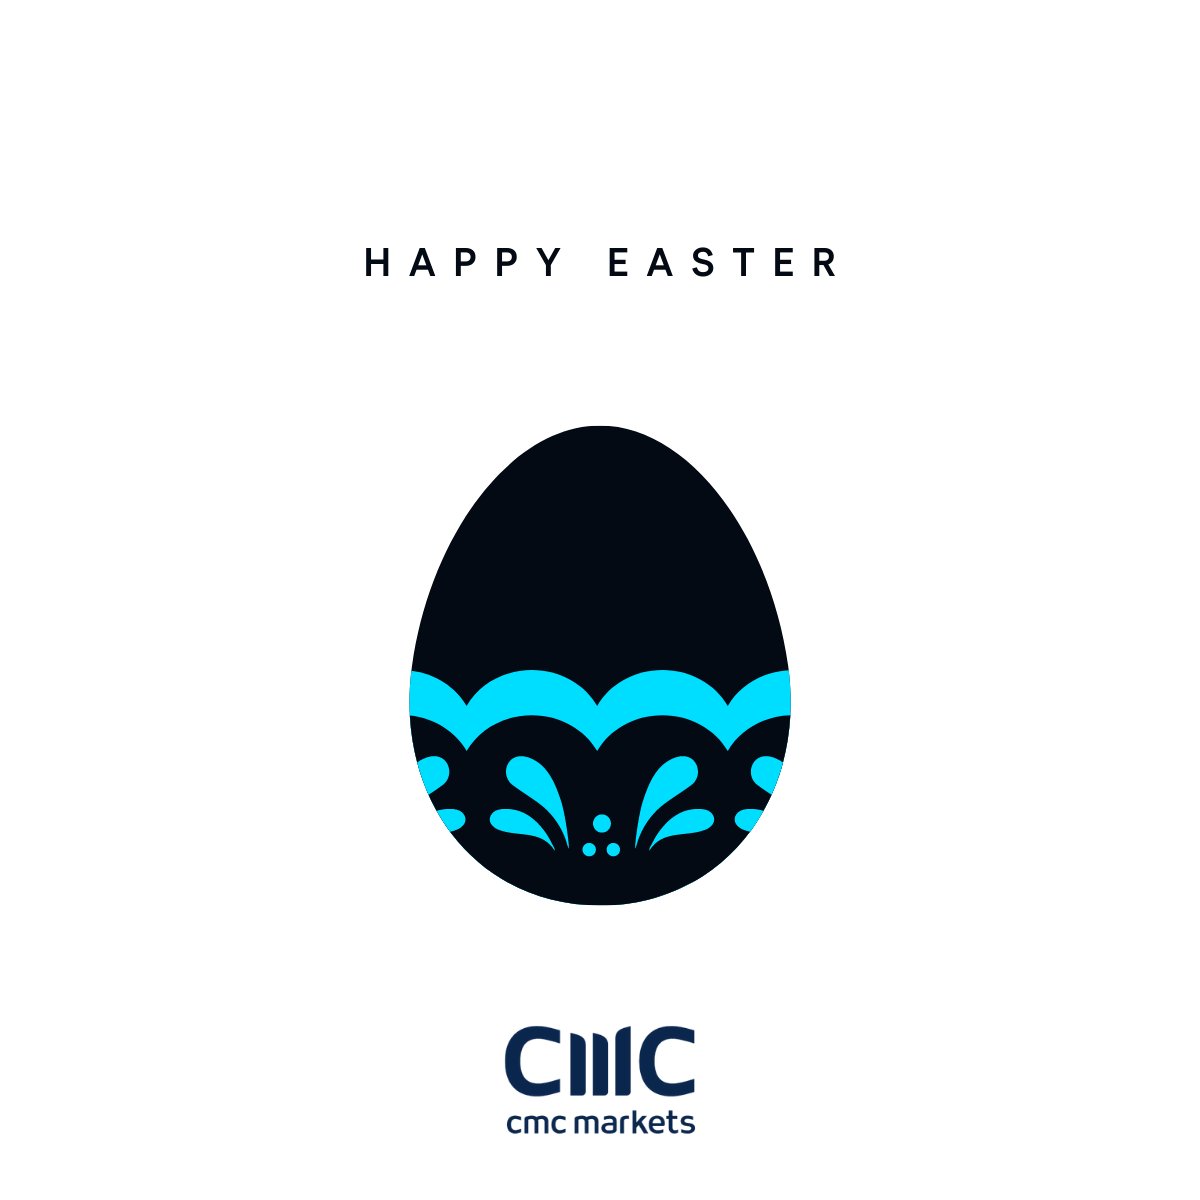 Cmc Markets Have A Safe And Happy Long Weekend Holiday From Everyone At Cmc